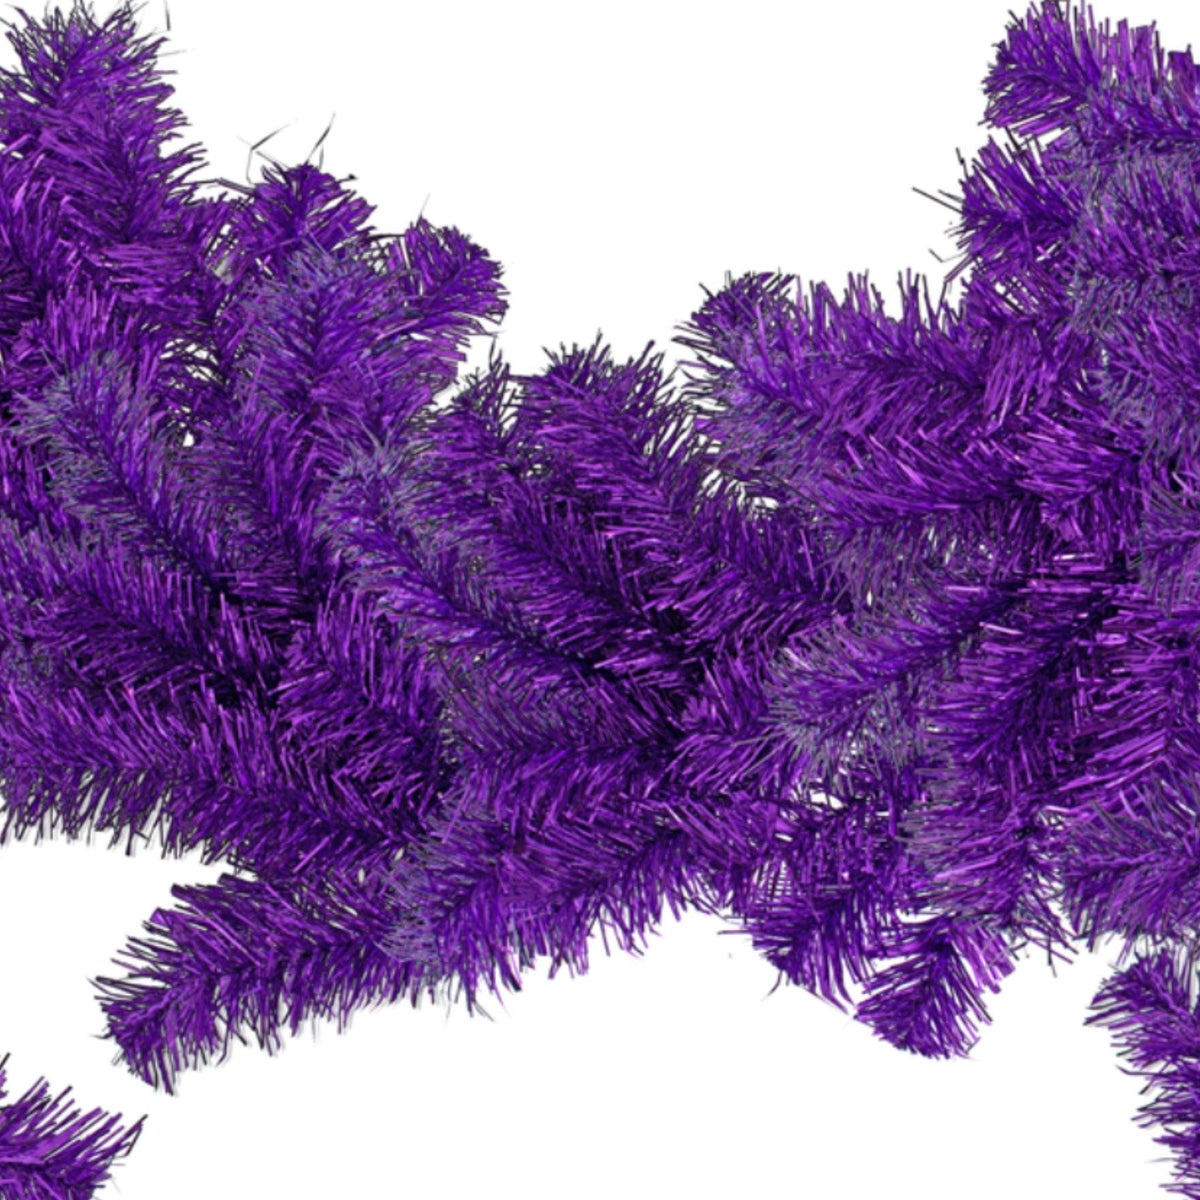 Shop for Lee Display's brand new 6FT Shiny Metallic Purple Tinsel Brush Garlands on sale now at leedisplay.com.  Middle section